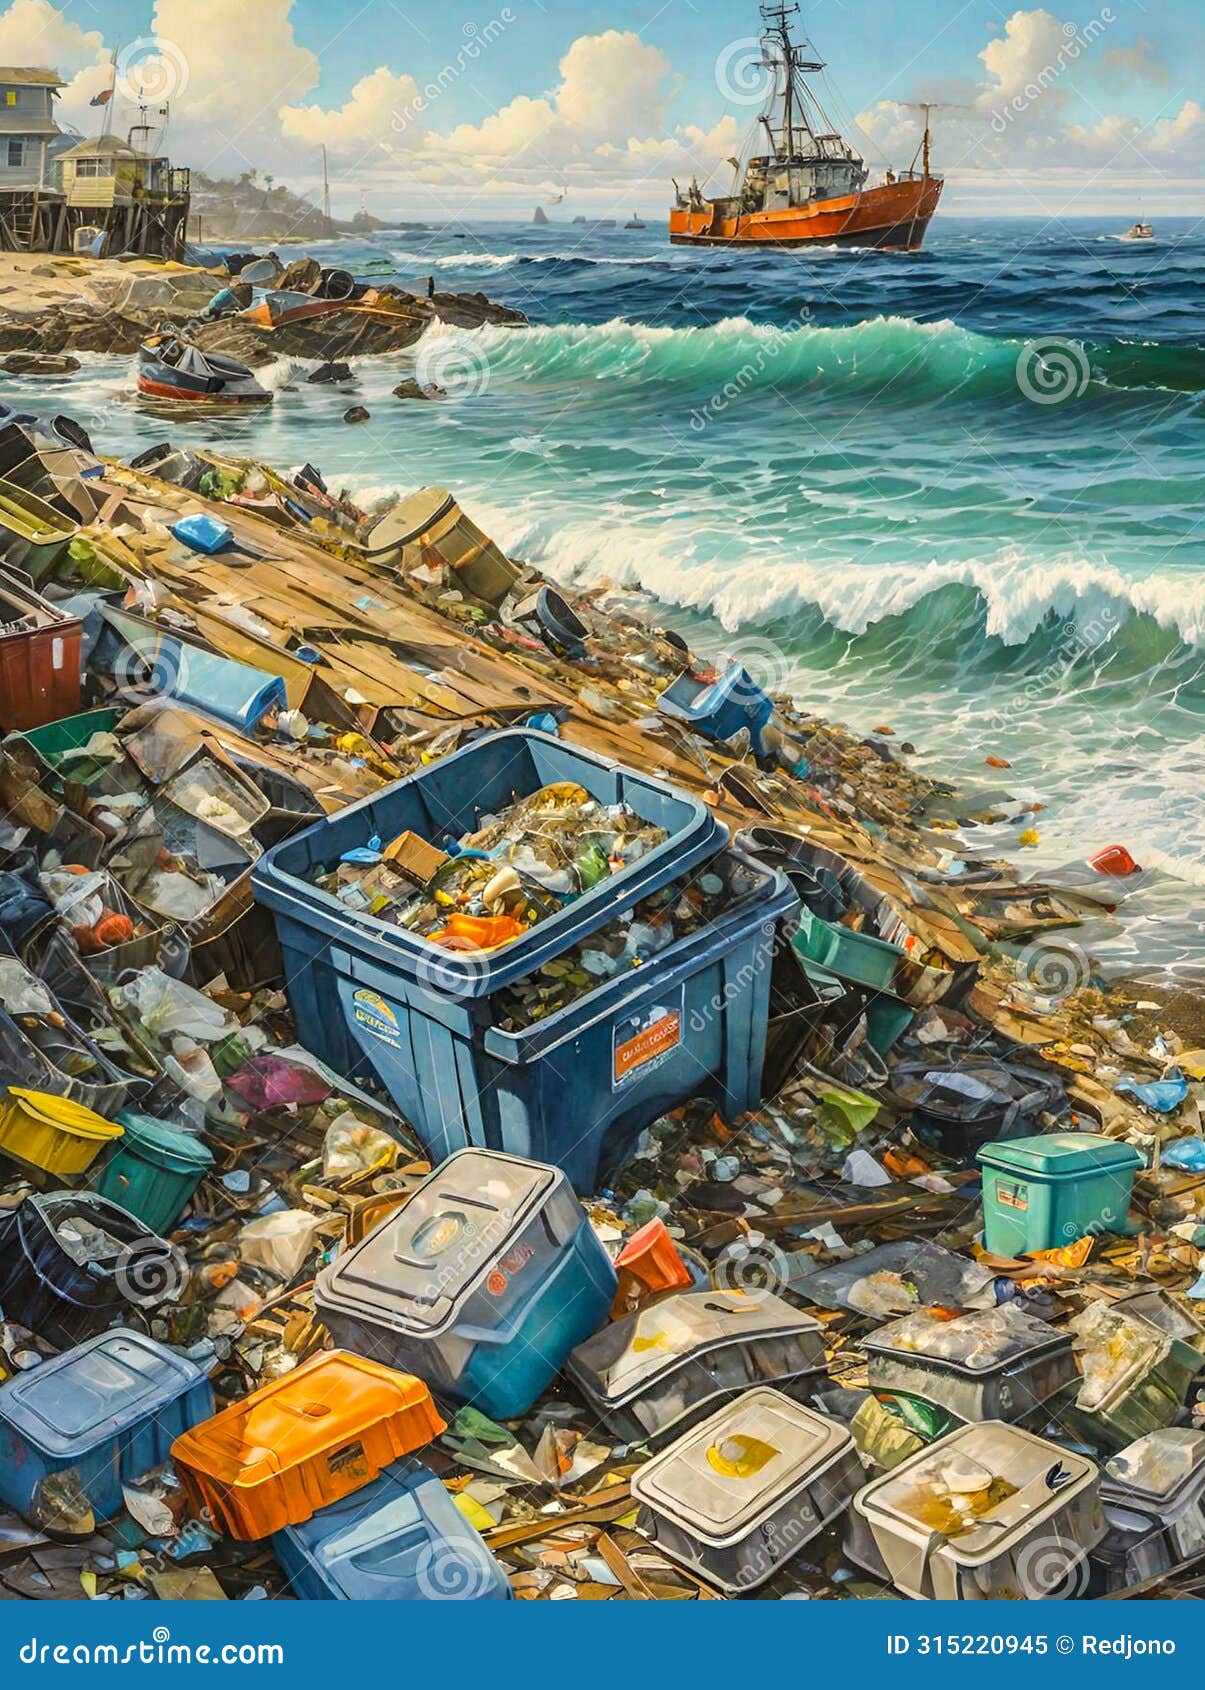 the future of earths polluted coastlines